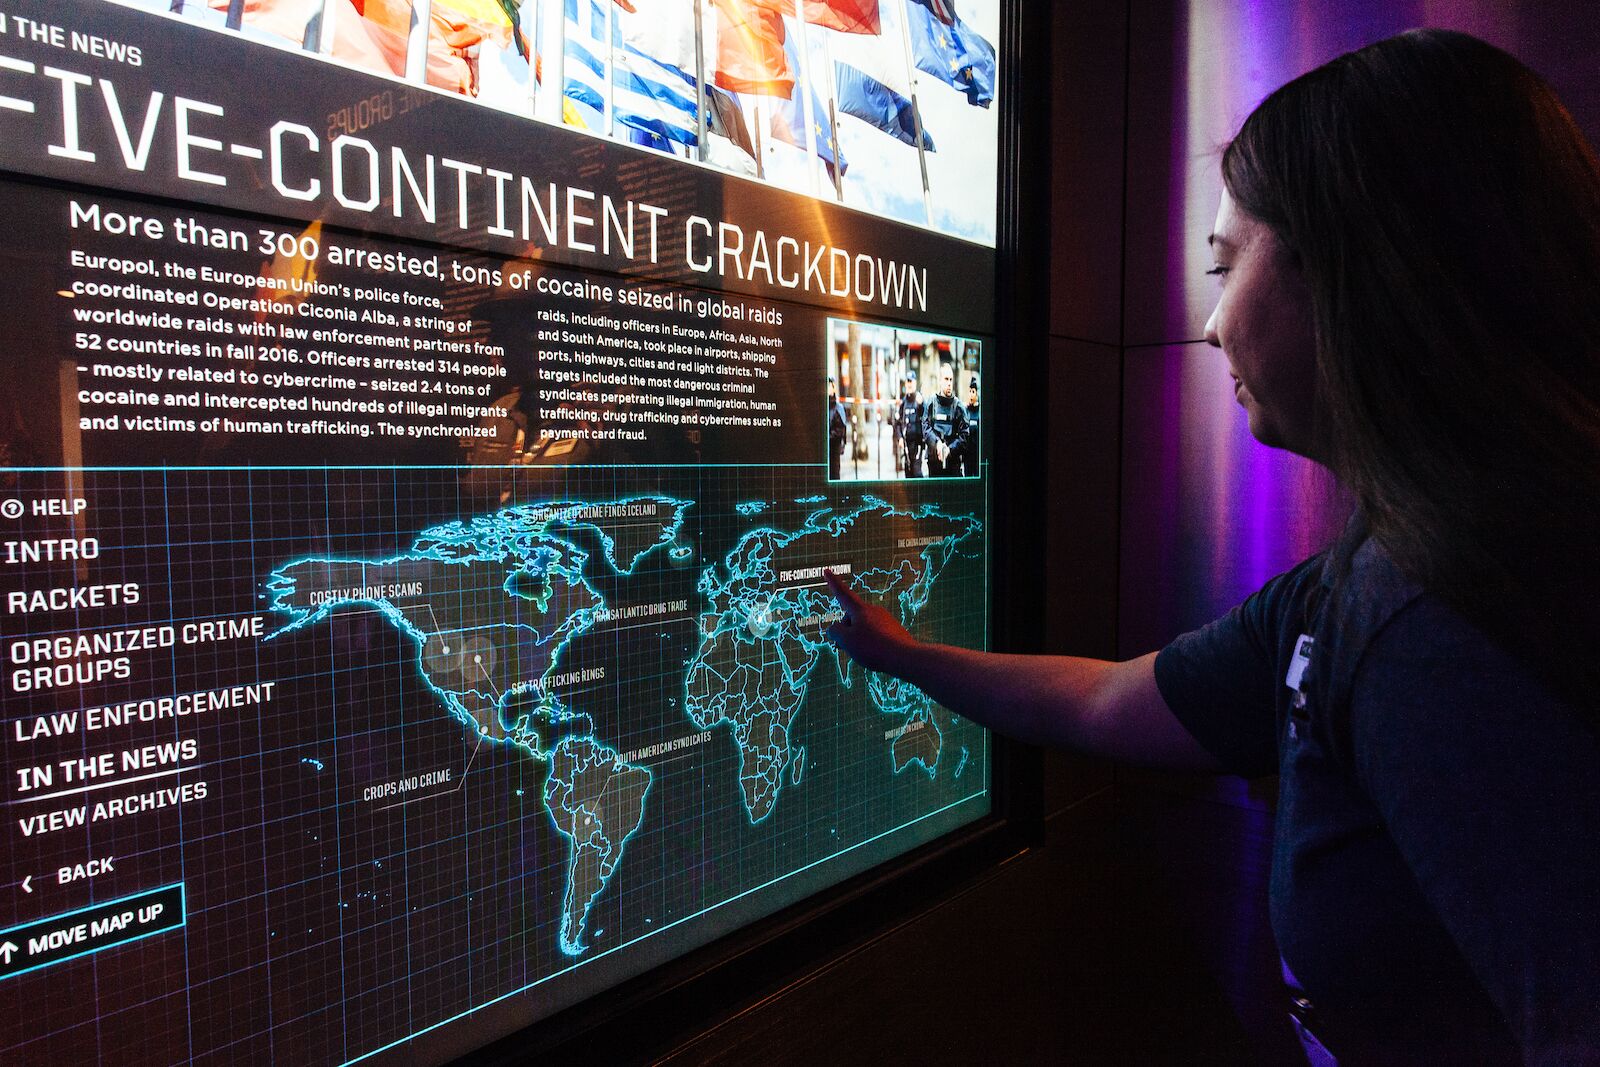 The Global Network Touch Wall at the Mob Museum